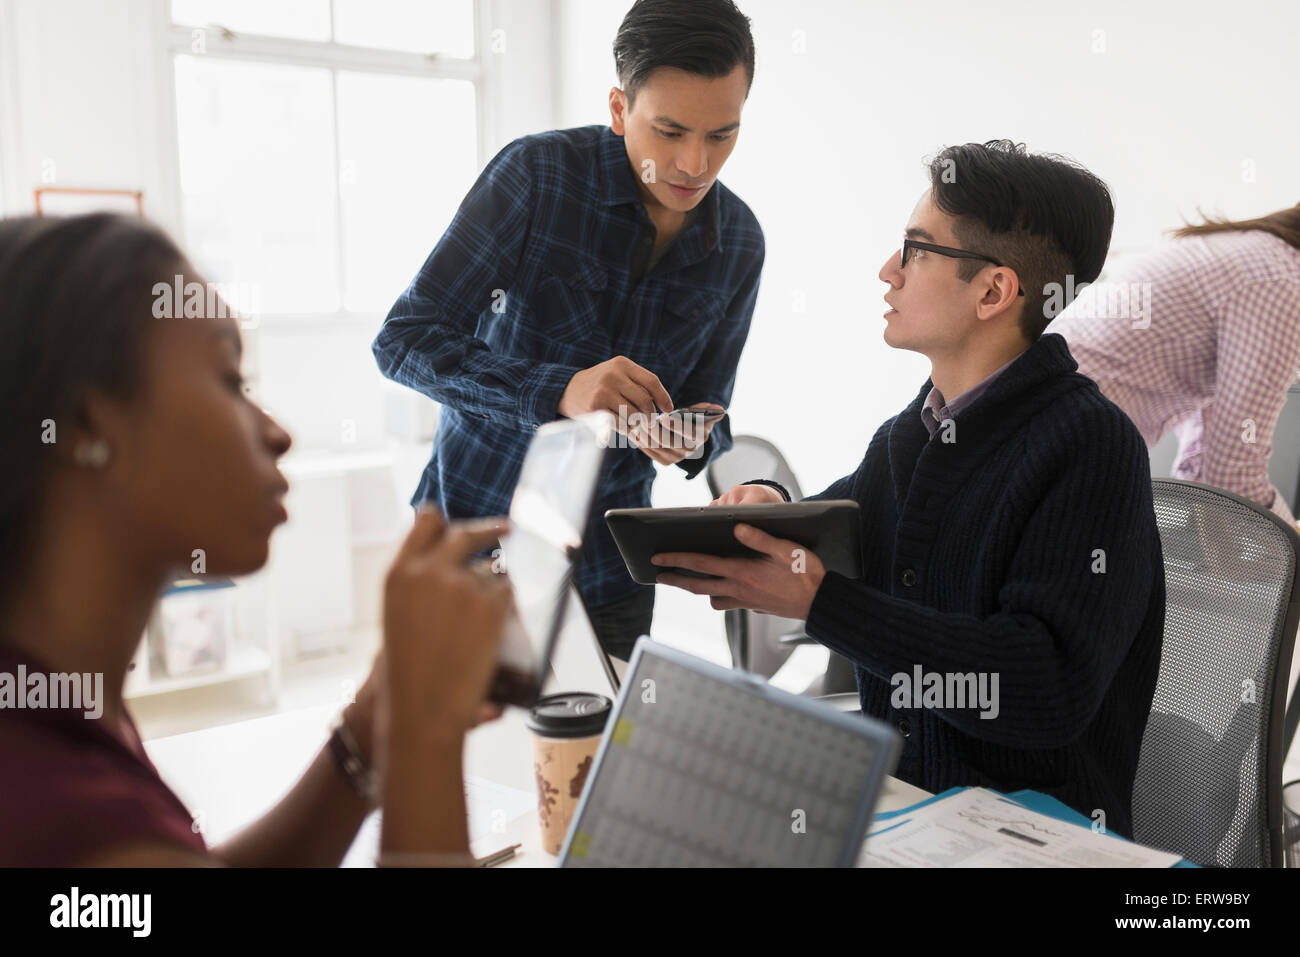 Business people using technology in office Stock Photo